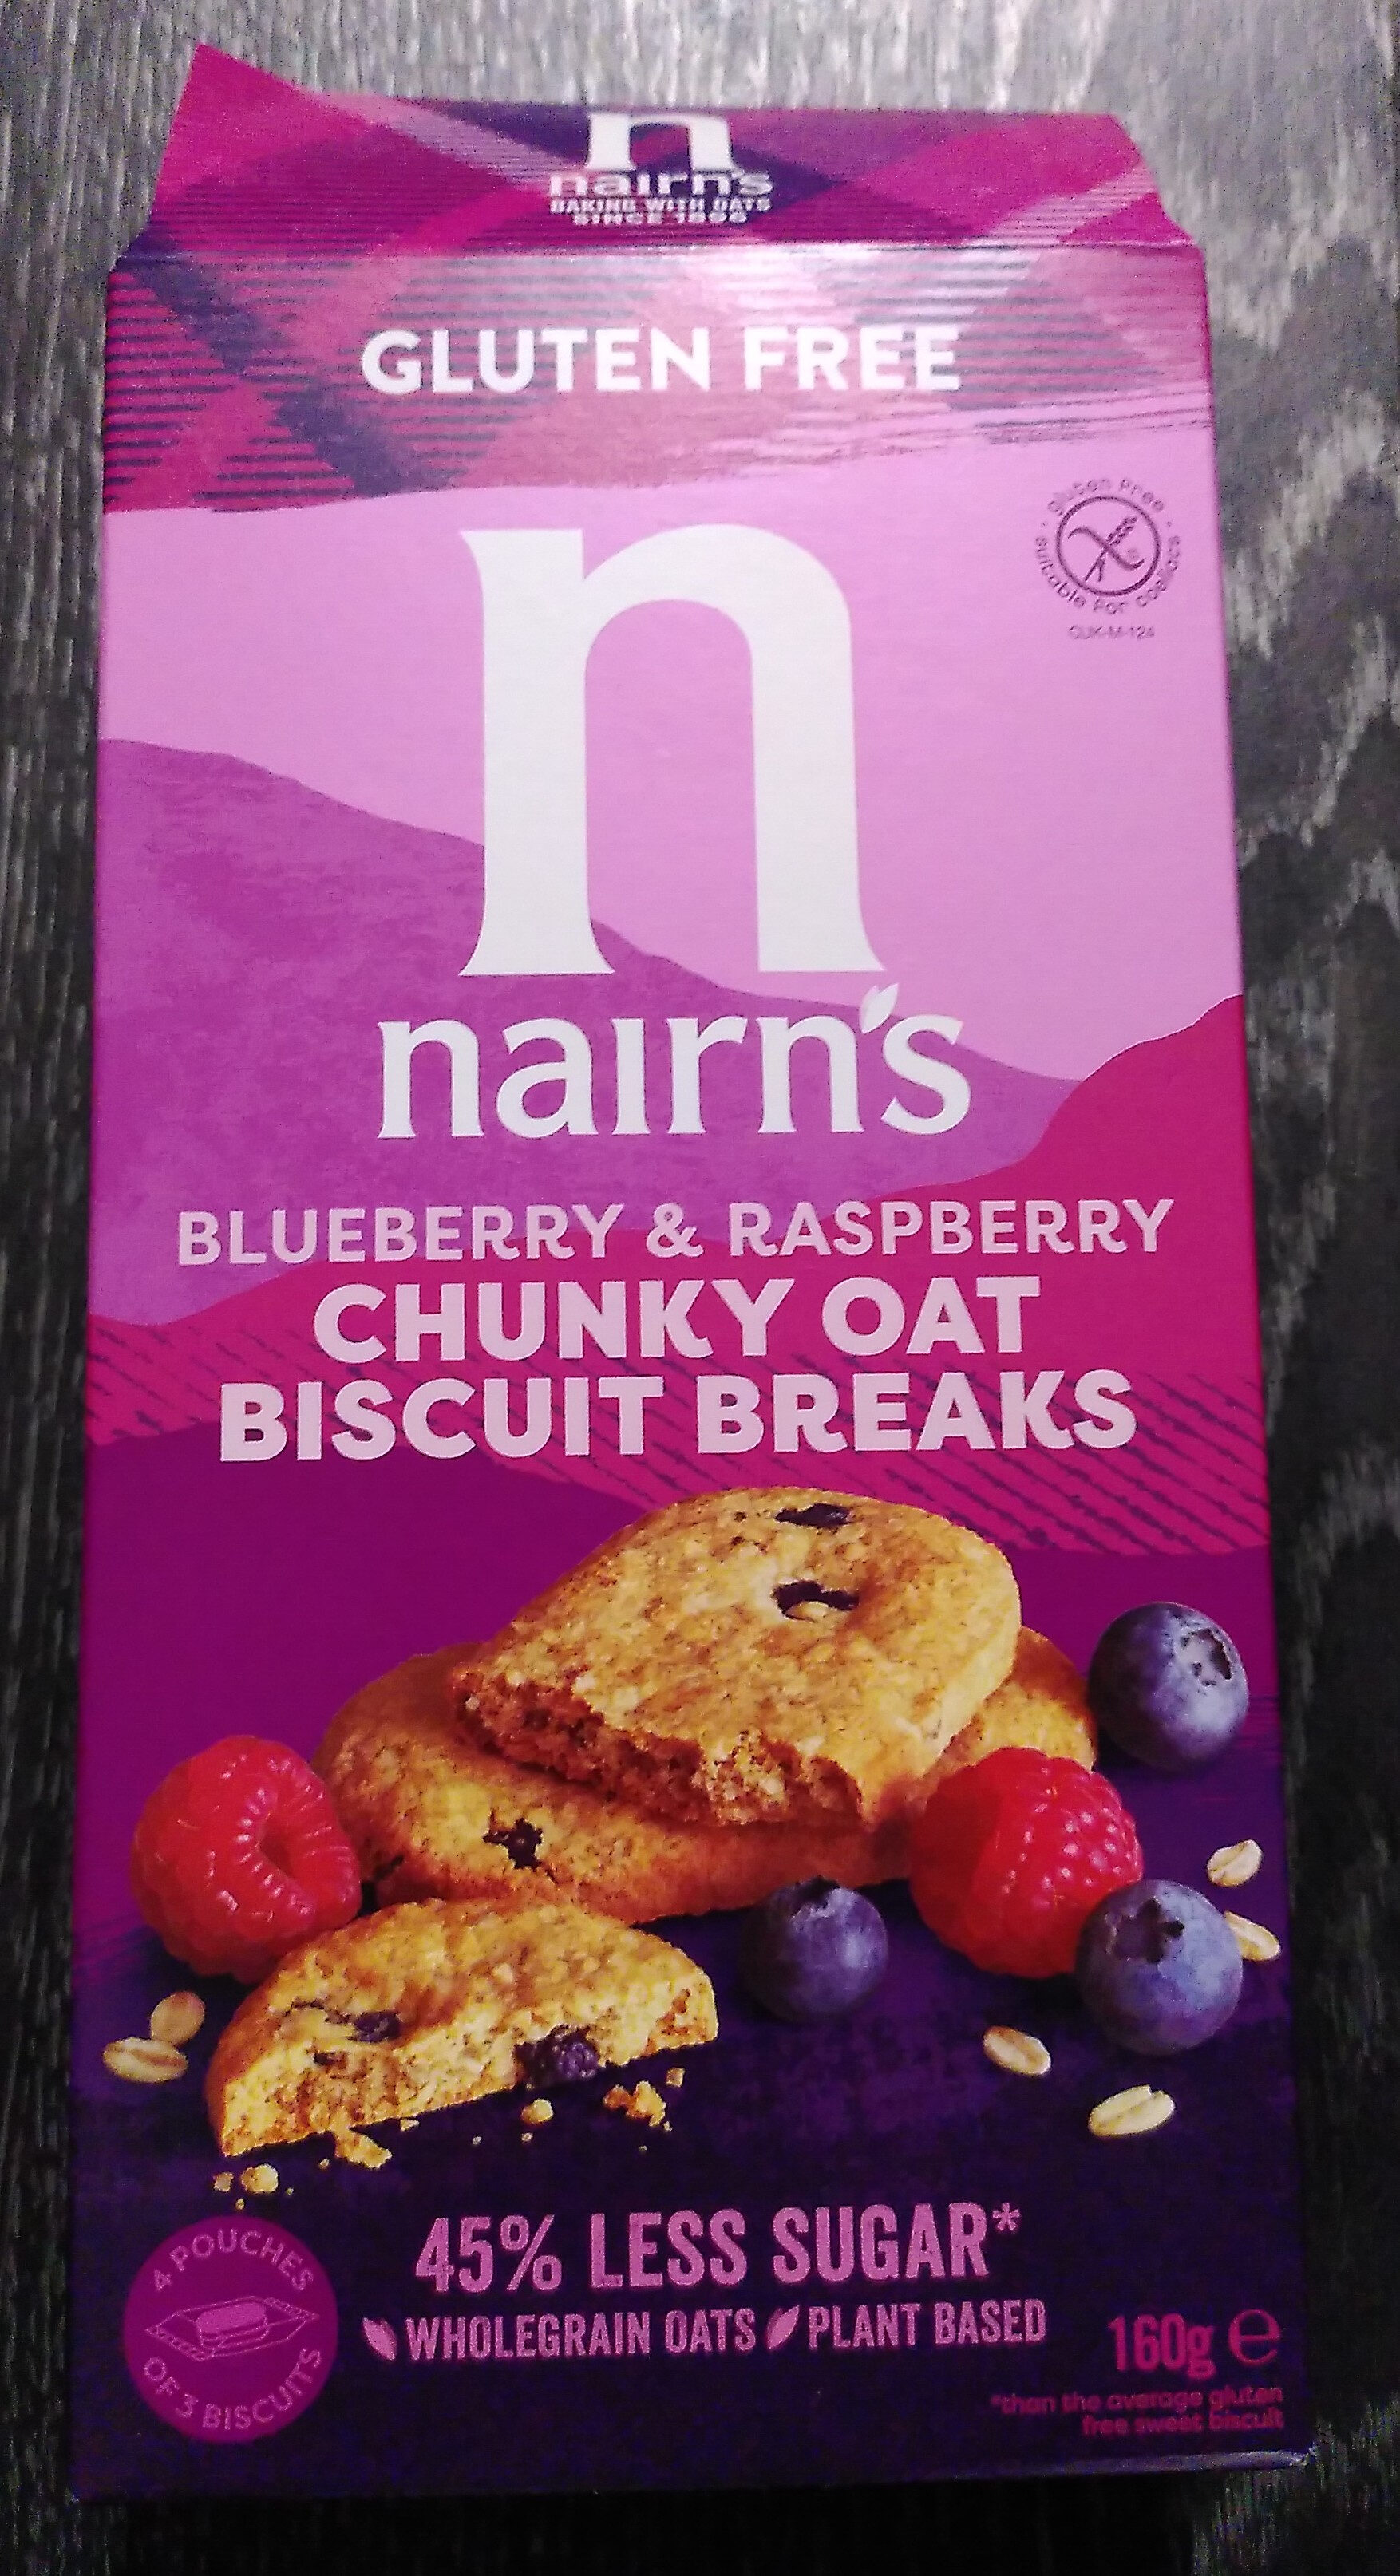 Blueberry & Raspberry Chunky Oat Biscuit Breaks - Product